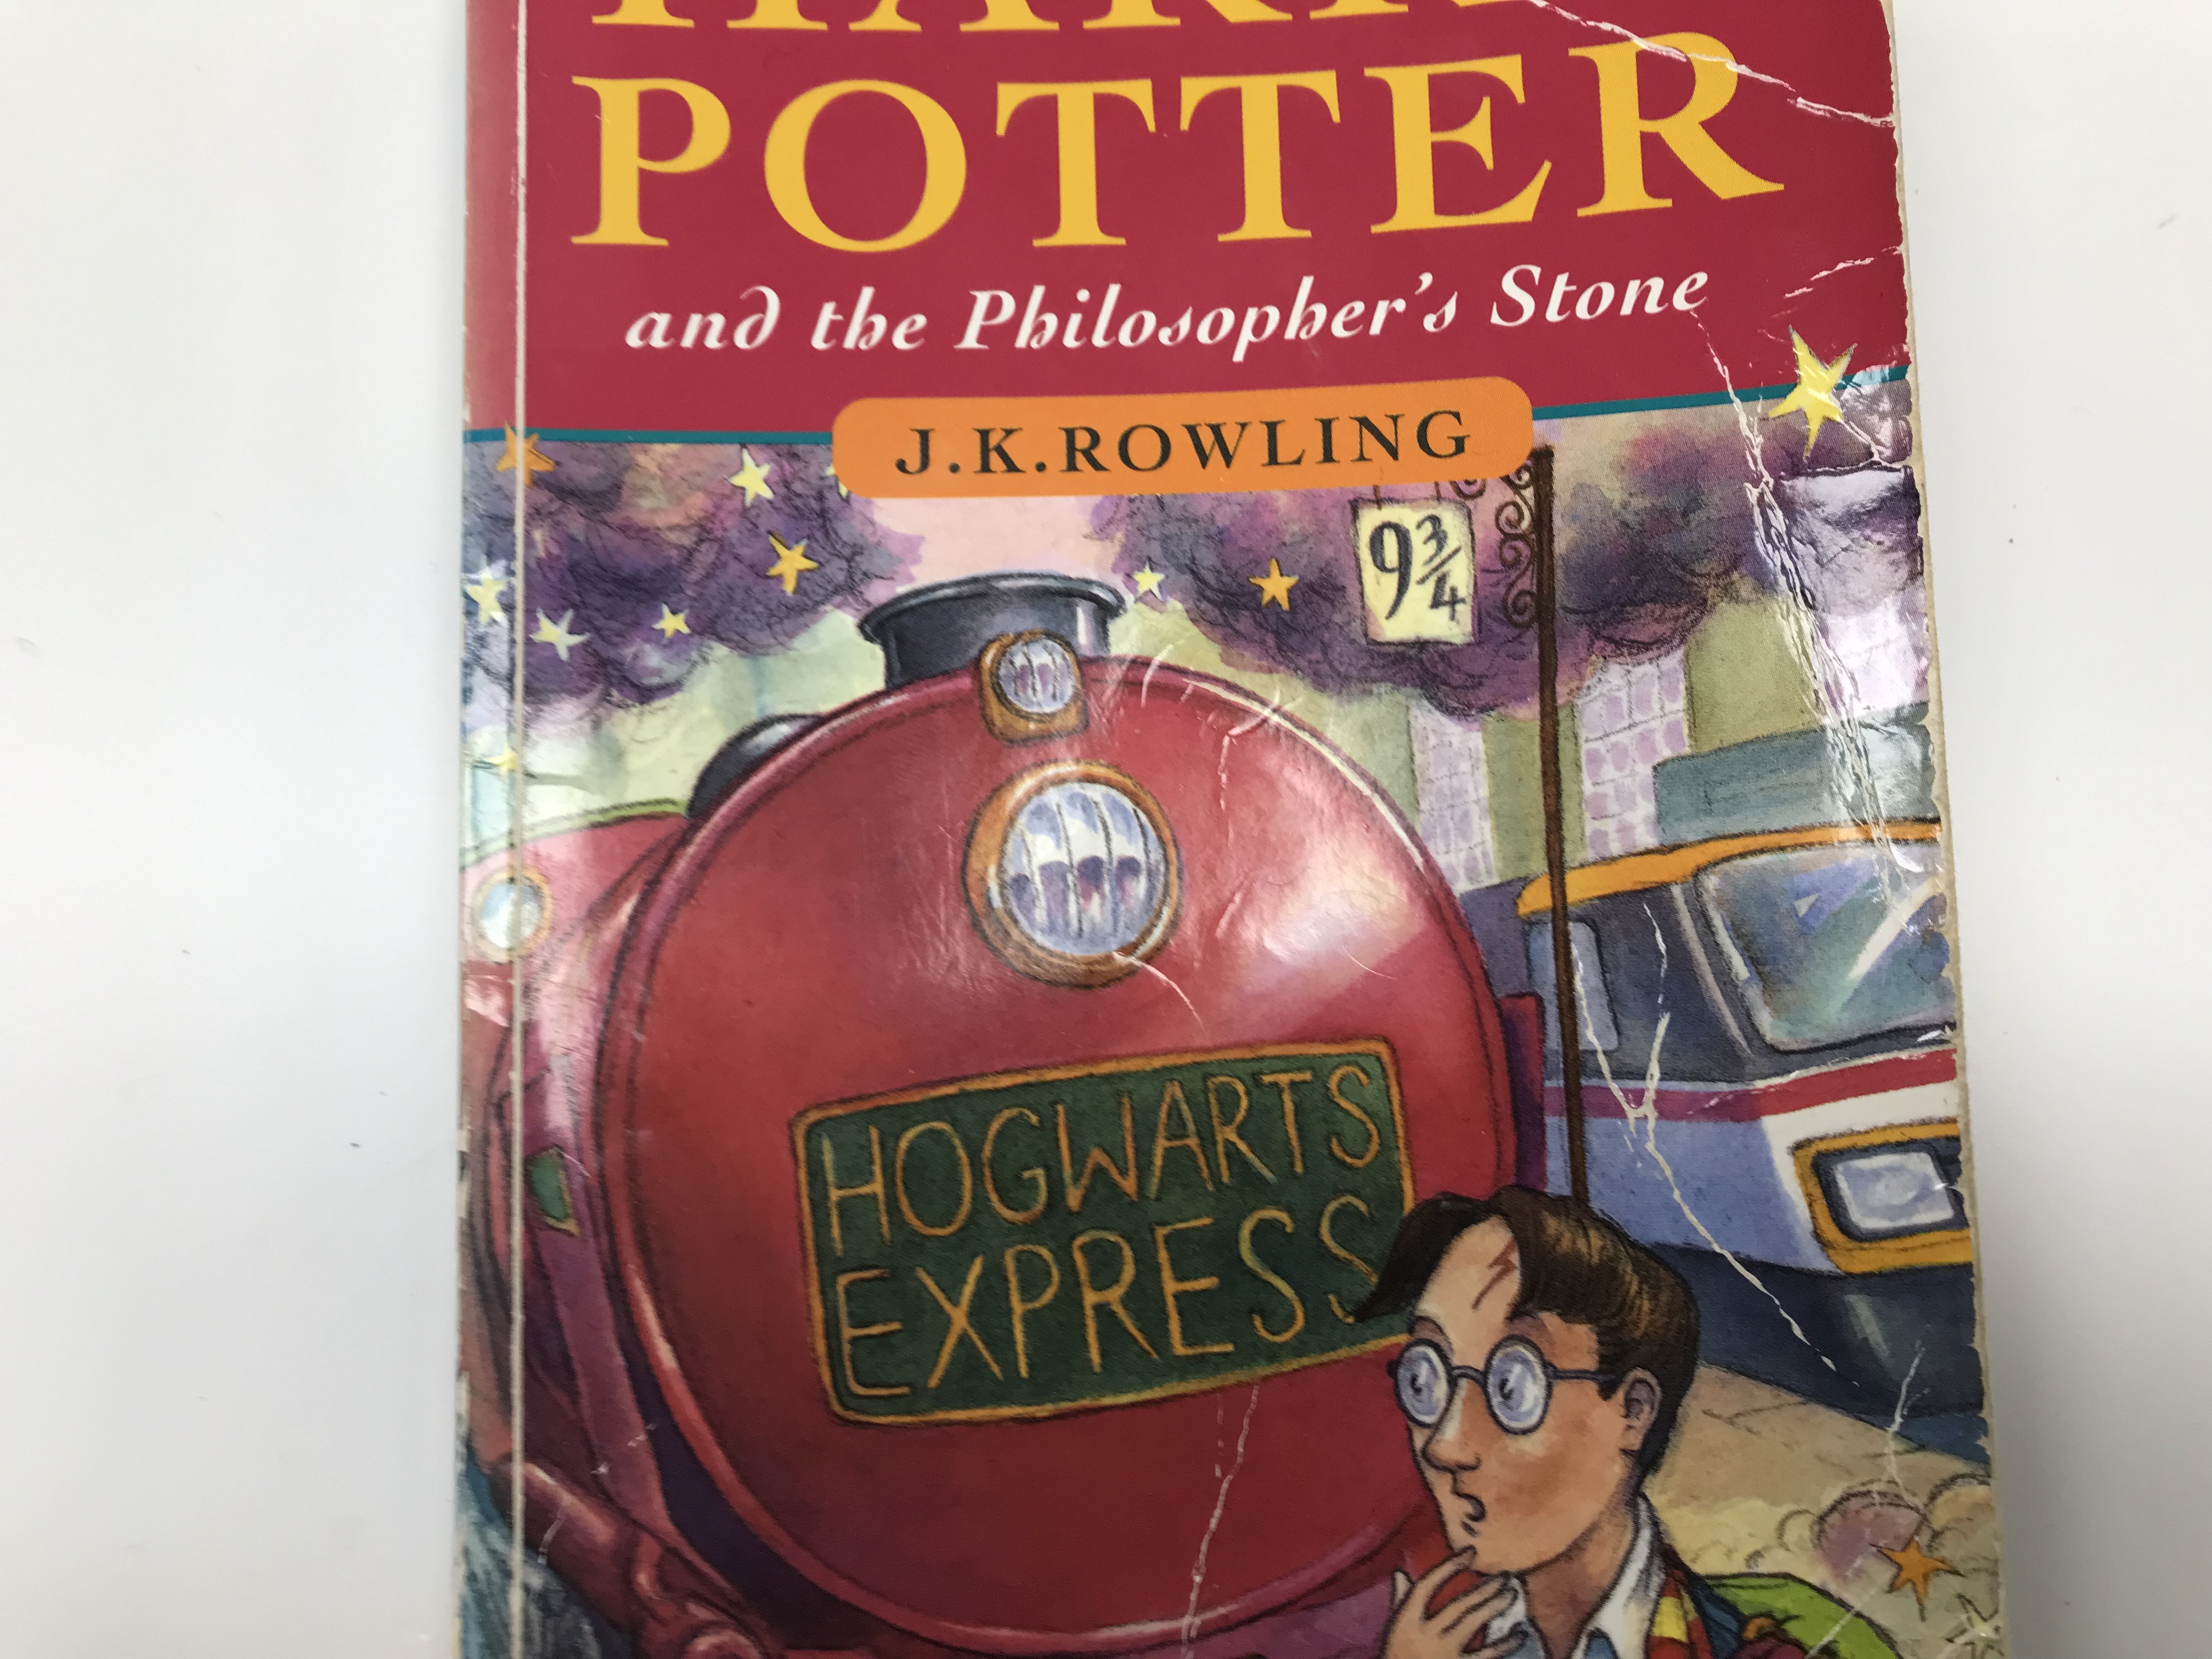 J K ROWLING "Harry Potter and The Philosopher's Stone", first edition, paperback, - Image 22 of 30